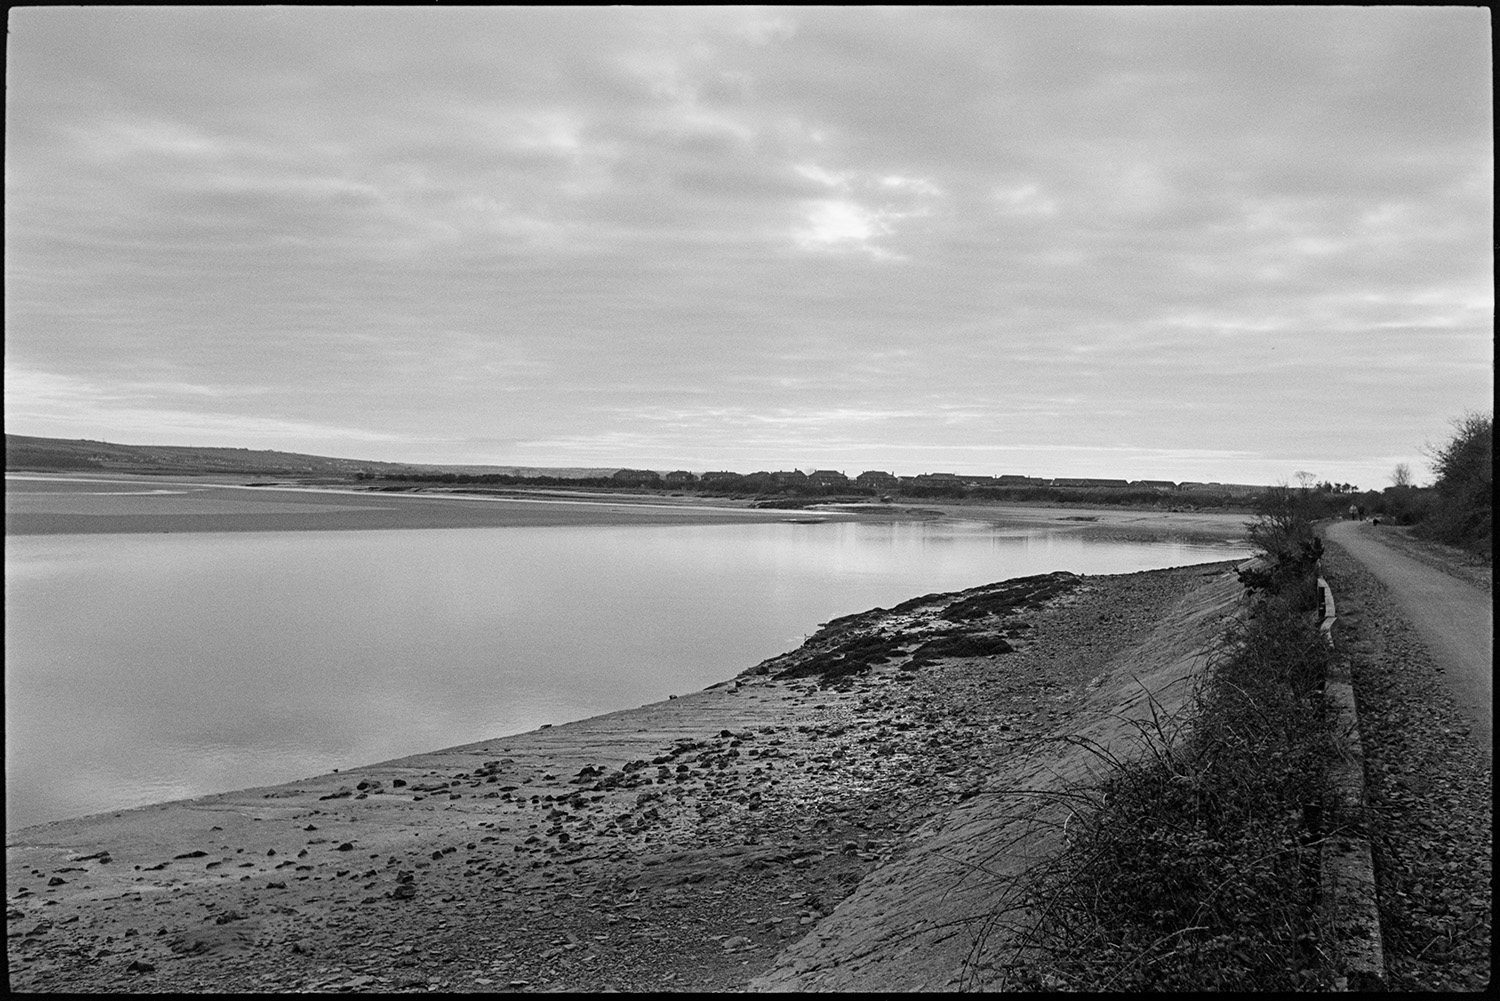 Towpath with walker and cyclist beside estuary.
[View Westwards from the towpath alongside the River Taw, near Barnstaple.]